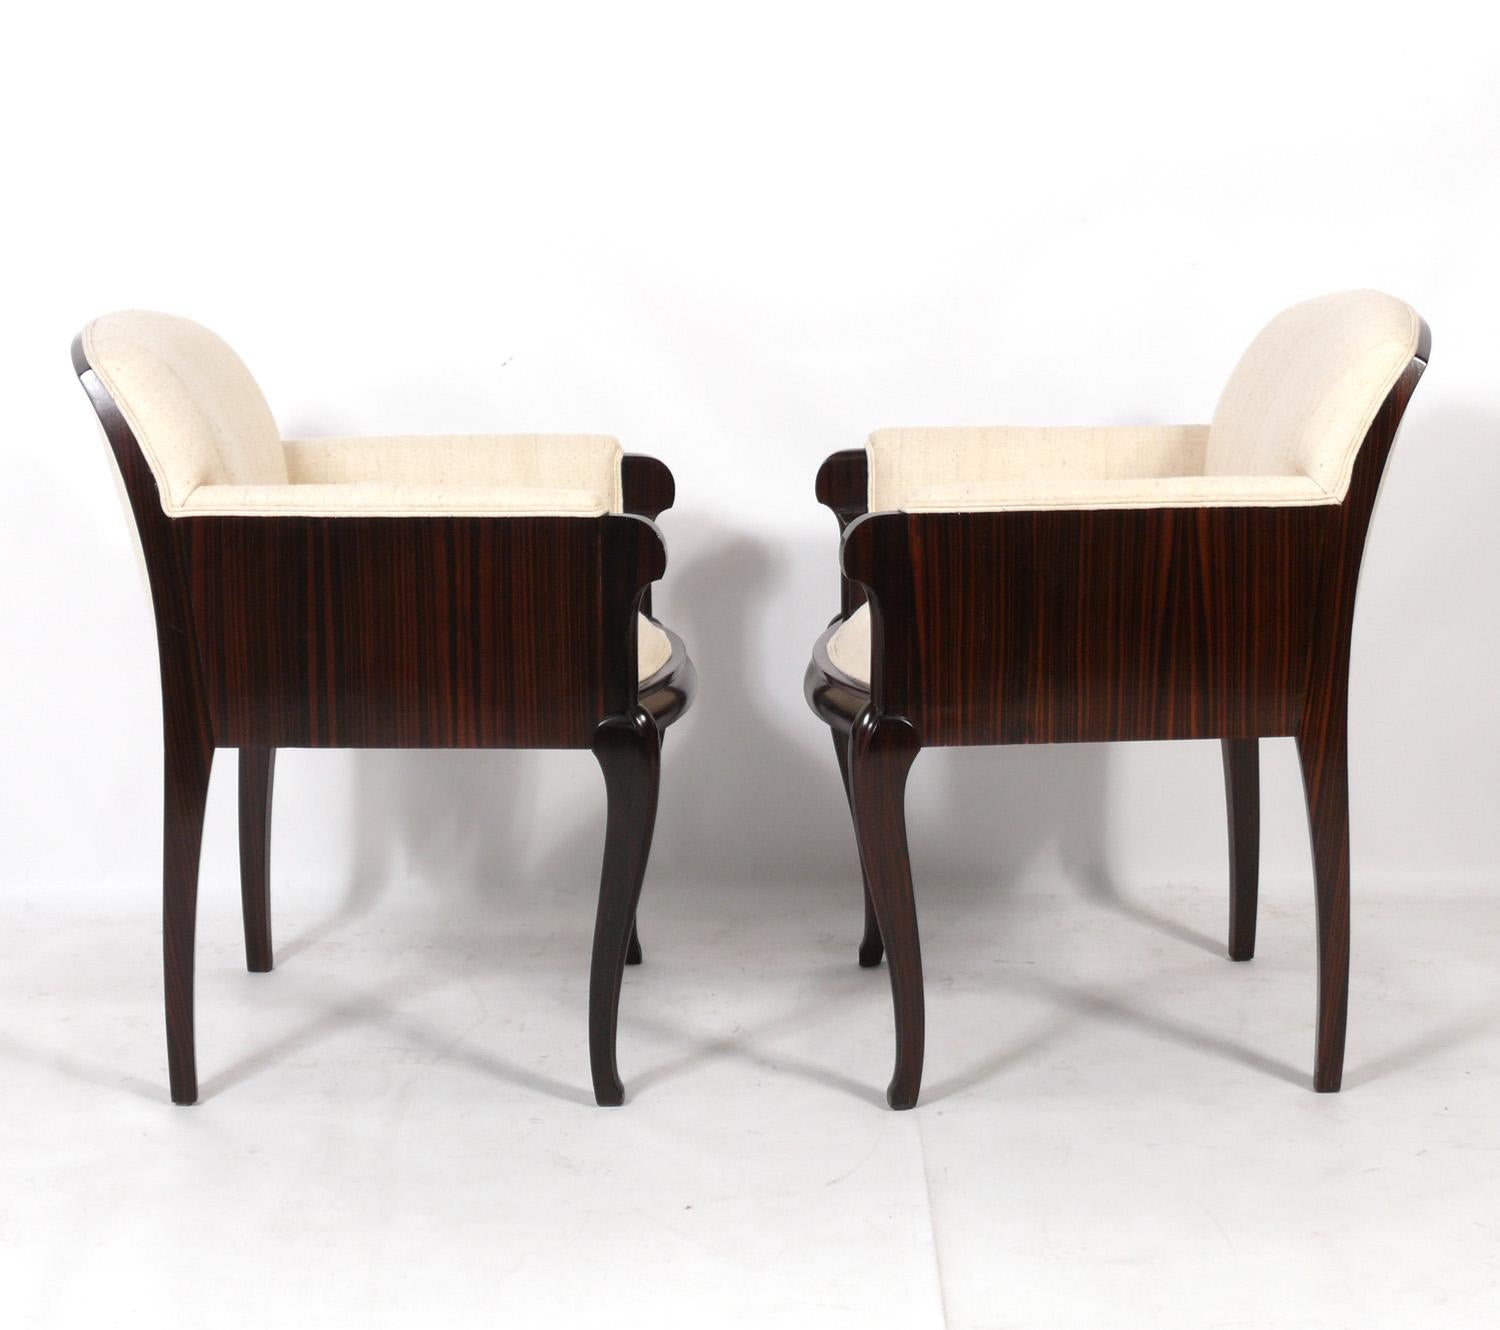 French Art Deco Rosewood and Silk Lounge Chairs, in the manner of Emile Jacques Ruhlmann, France, circa 1930s. They have been completely restored with a new lacquer finish and new raw silk upholstery. They are a versatile size and can be used as